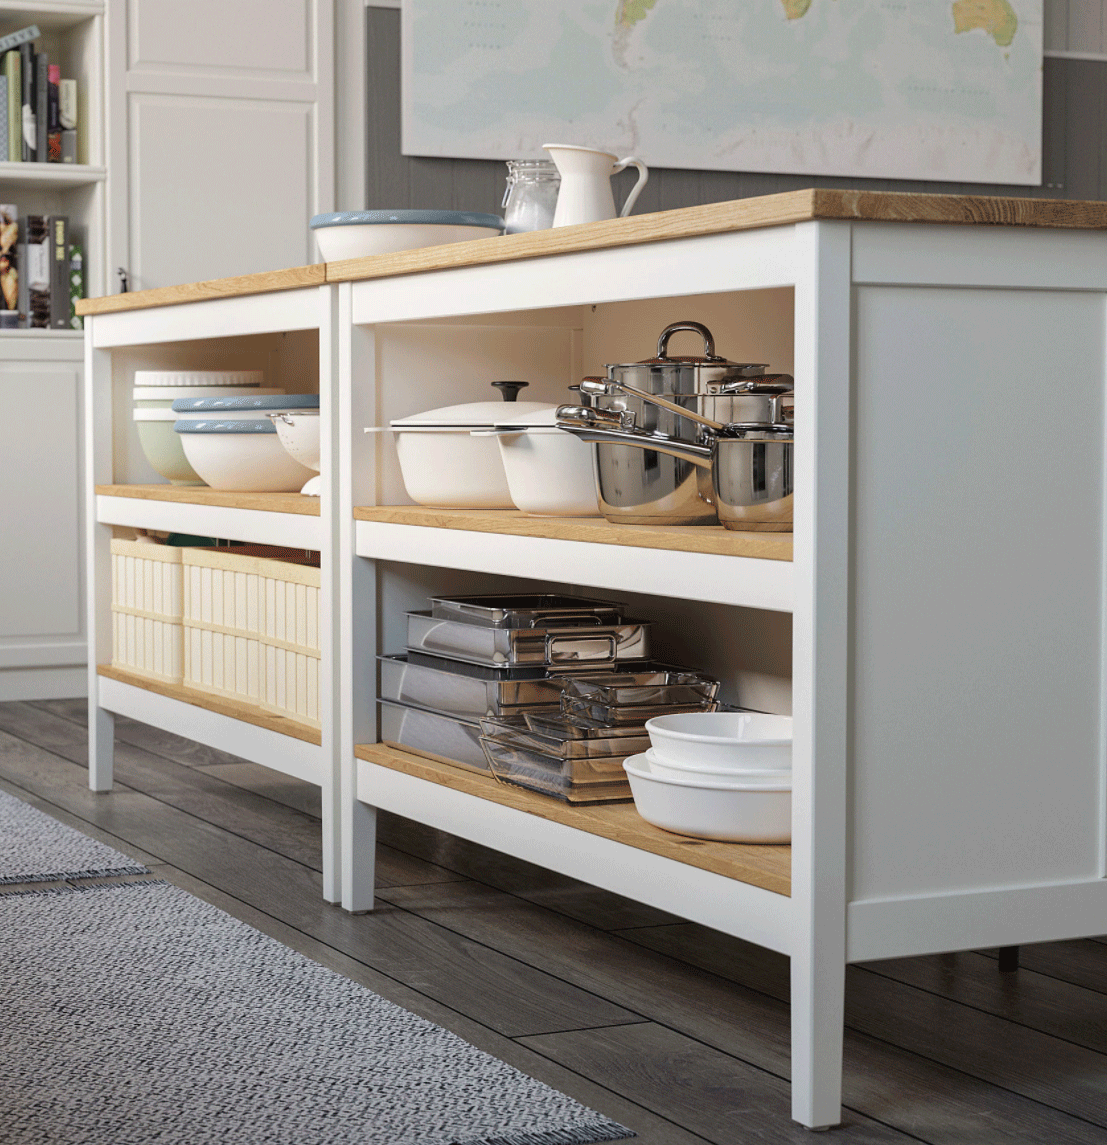 An example of portable kitchen island ideas showing a white portable island with open shelving for crockery and pans